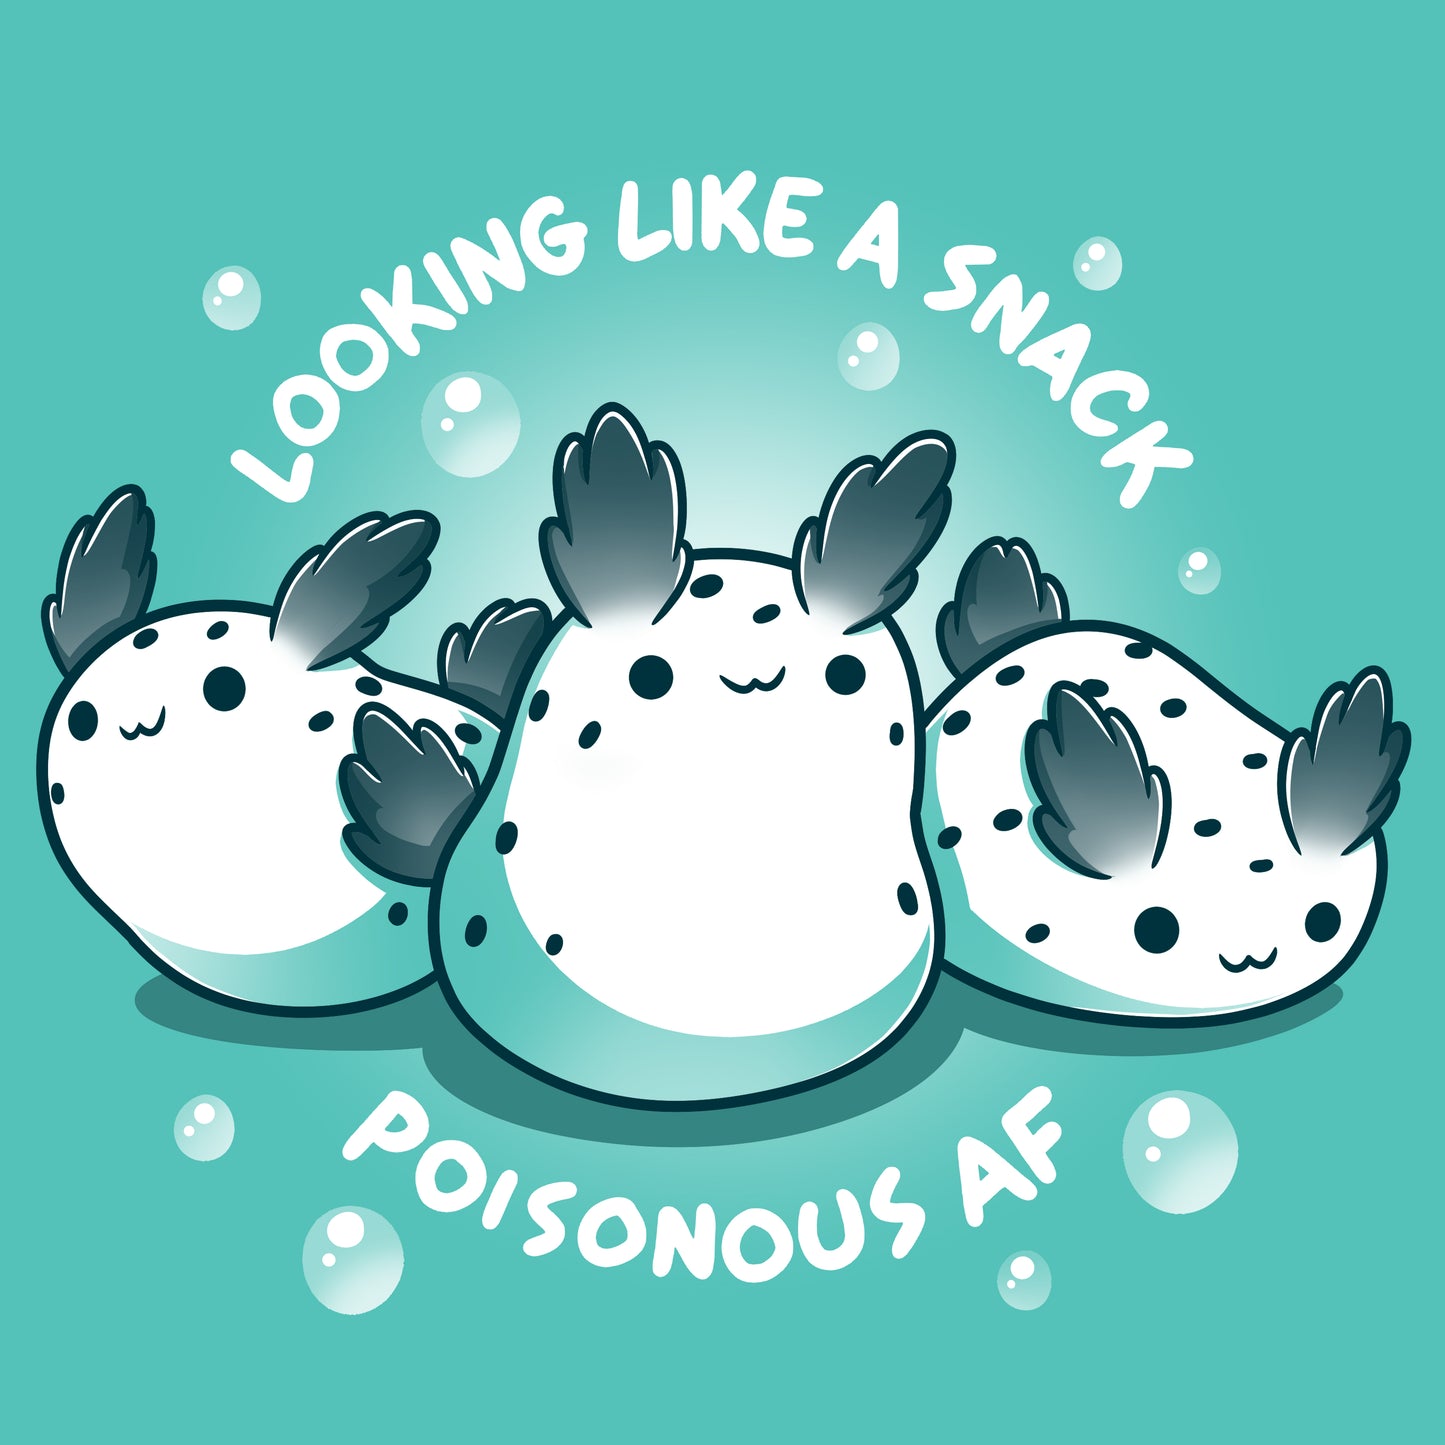 Premium Cotton T-shirt - Three cute, stylized creatures with black ear-like features and spots, reminiscent of sea bunnies, accompanied by the text "LOOKING LIKE A SNACK POISONOUS AF" on a Caribbean blue apparel background with bubbles. This is the Poisonous AF apparel from monsterdigital.